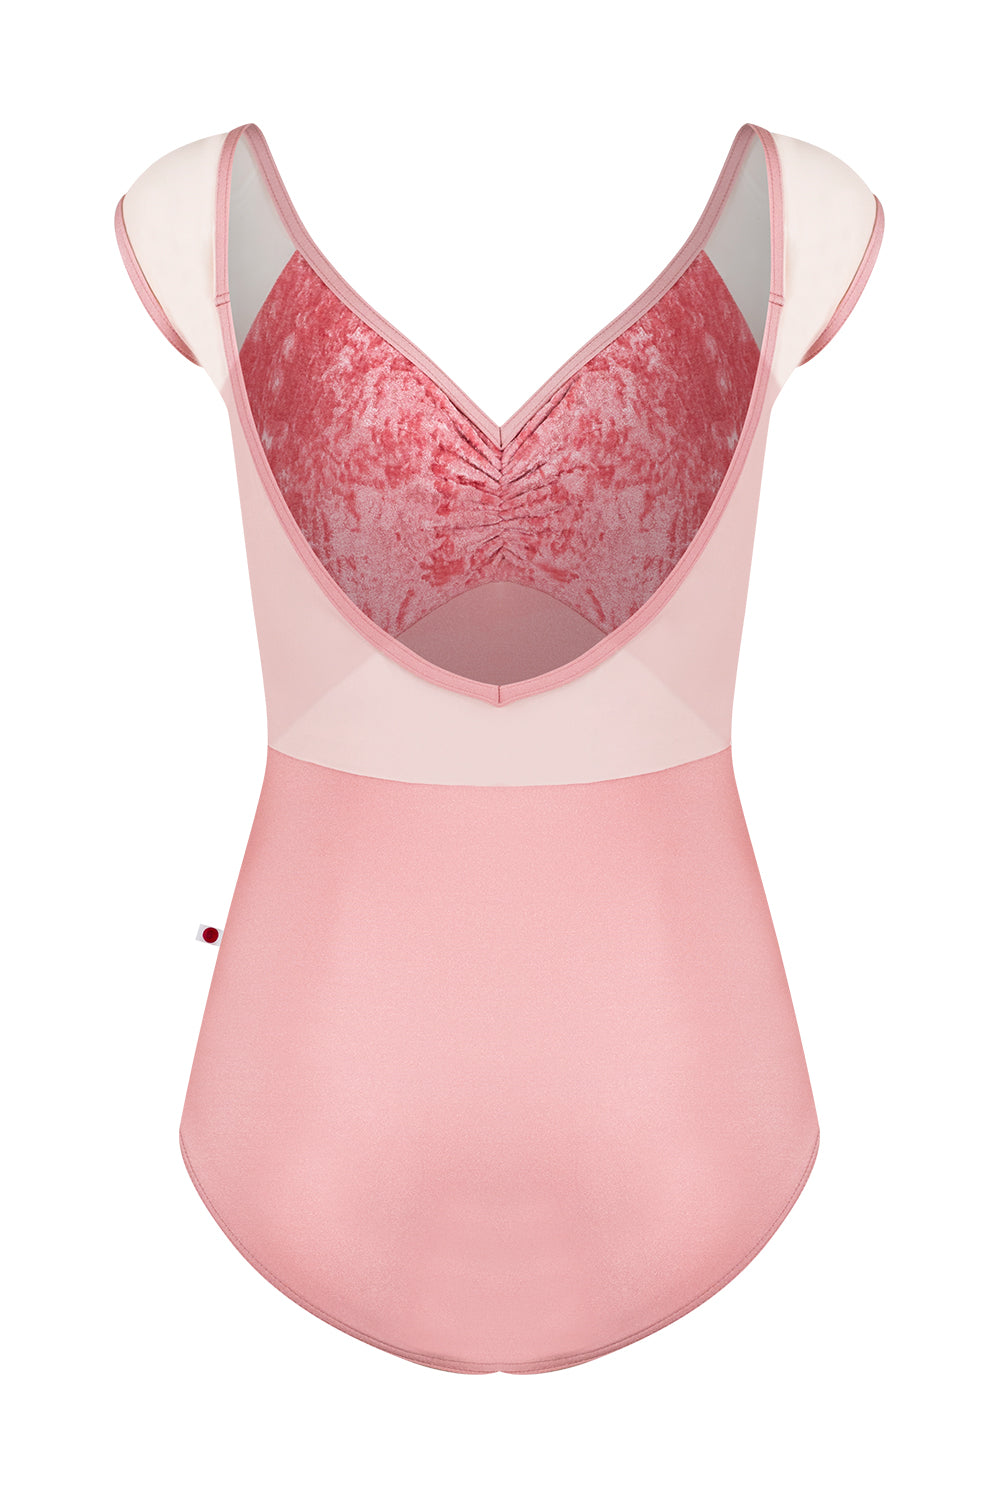 Yumiko Elli Leotard in Antique Rose and Romance SS24-01